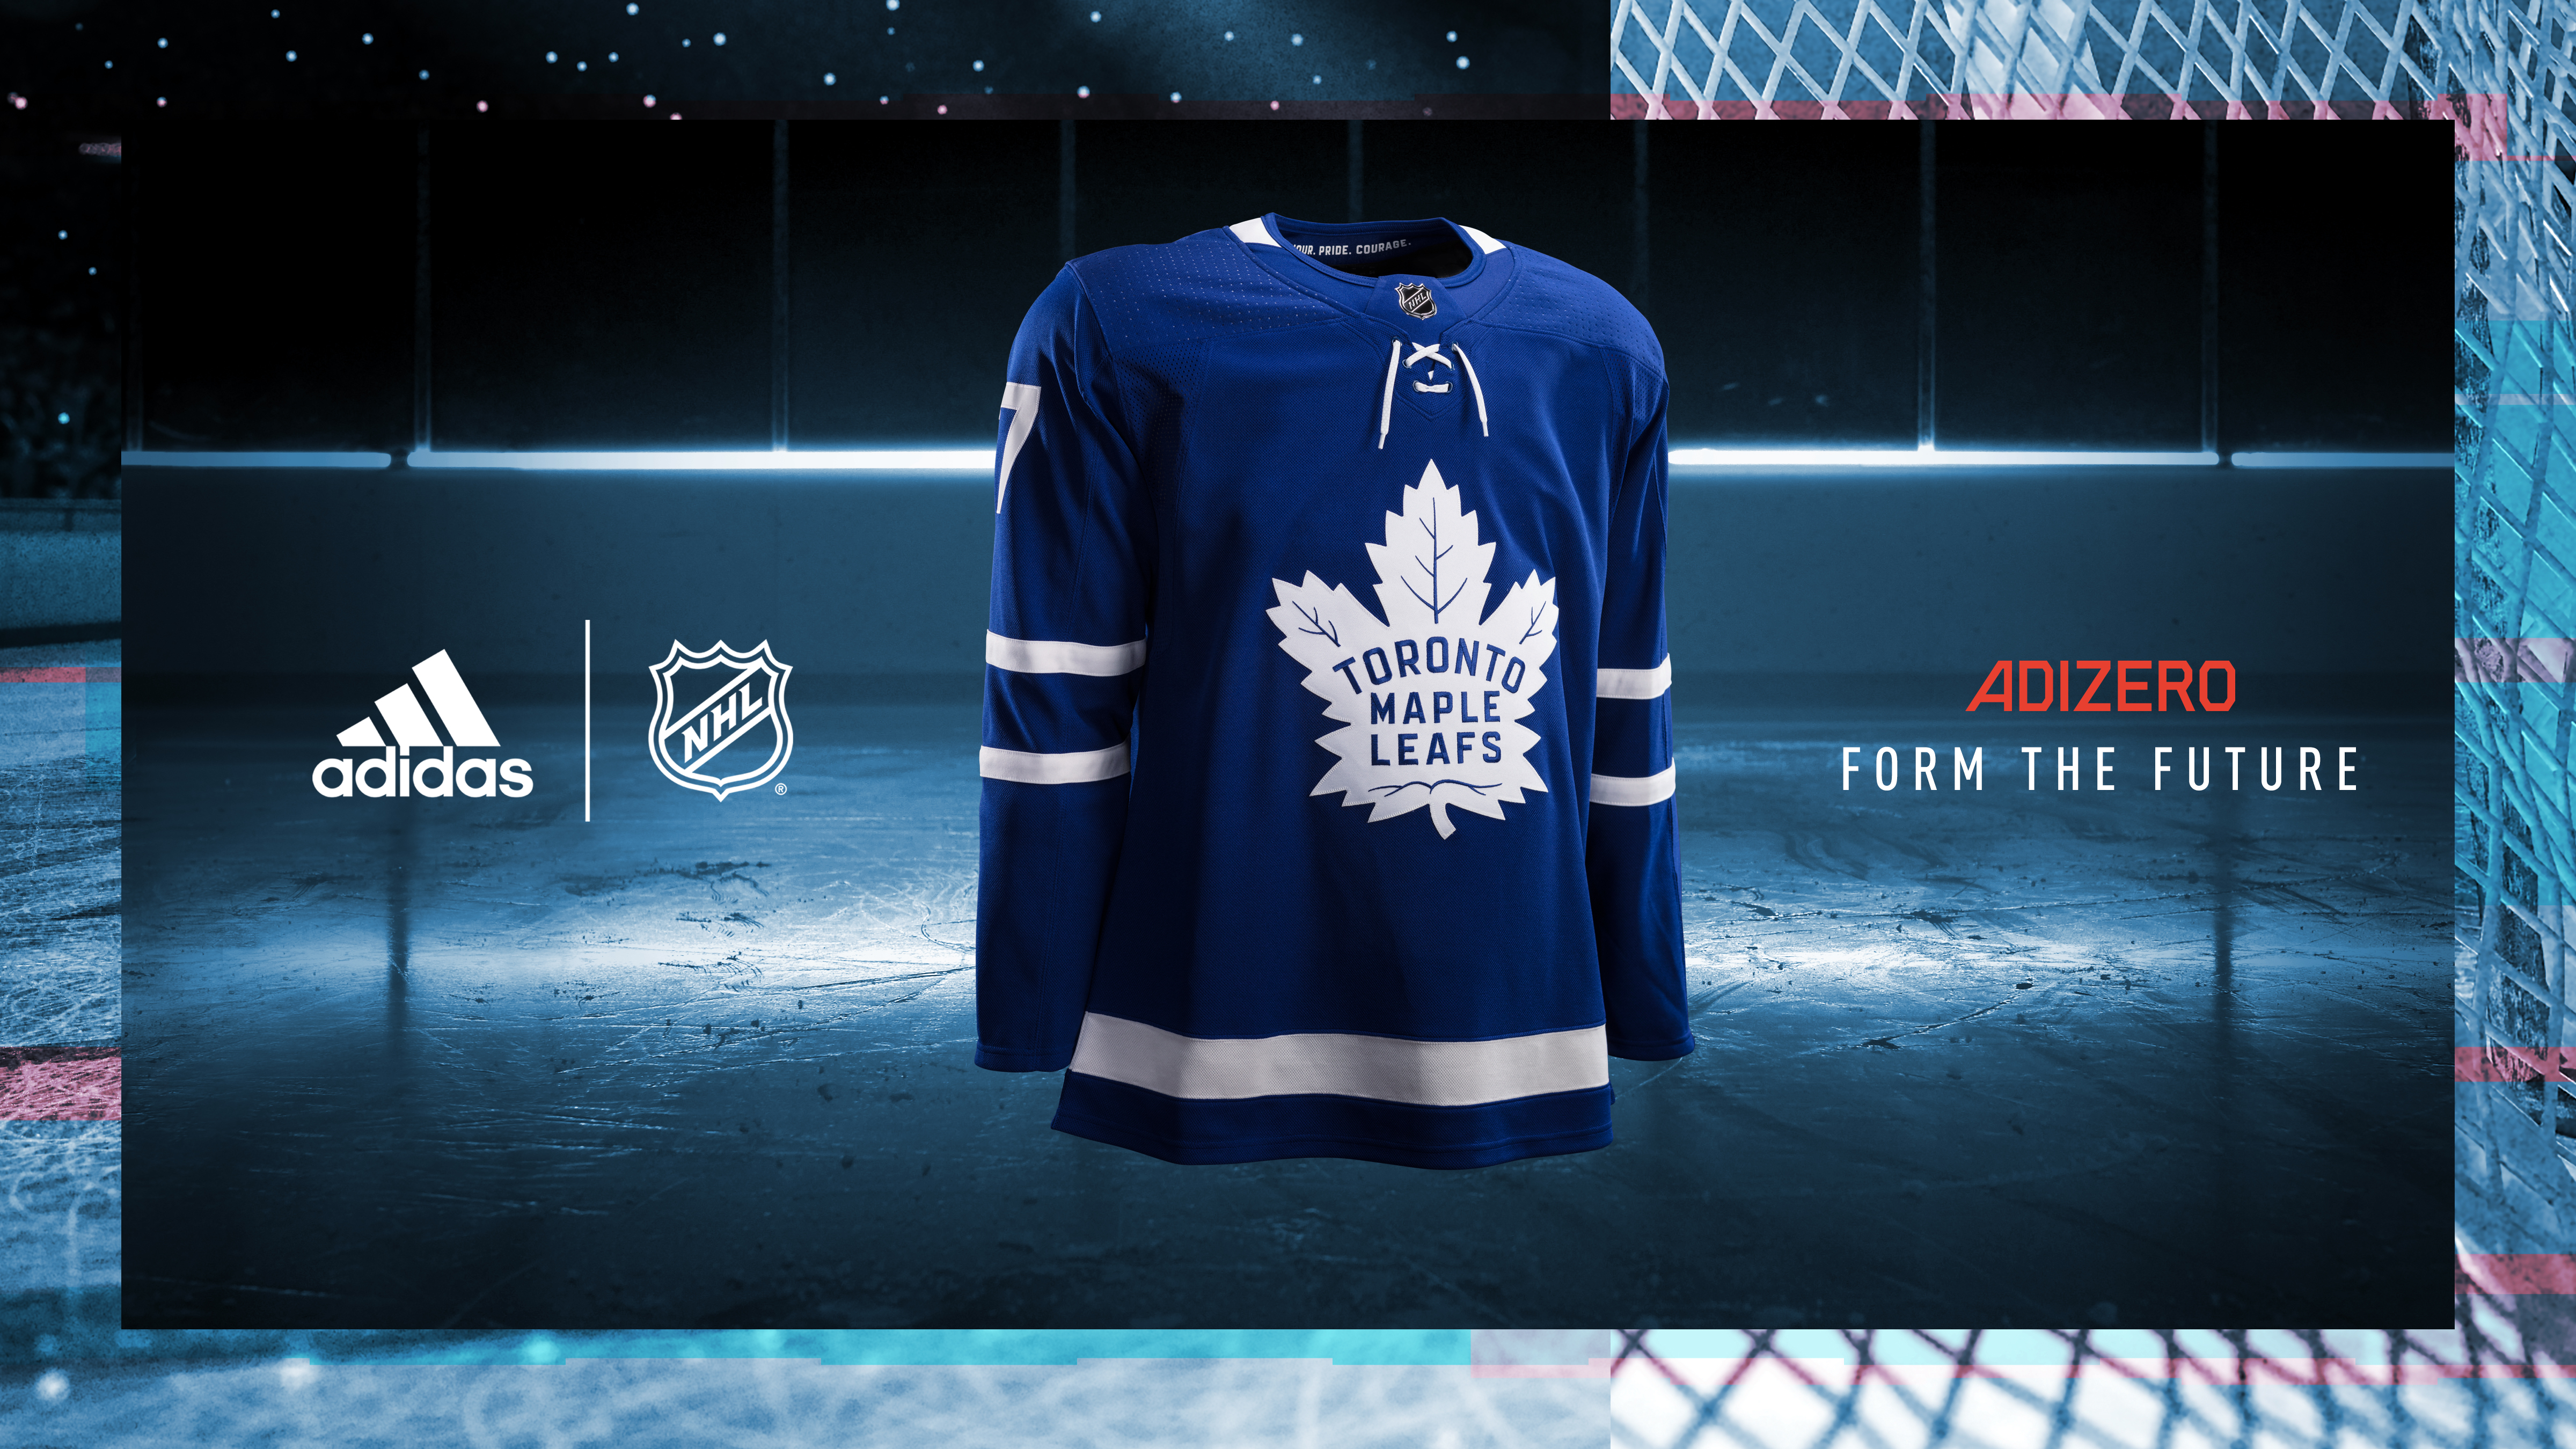 new leafs jersey 2017